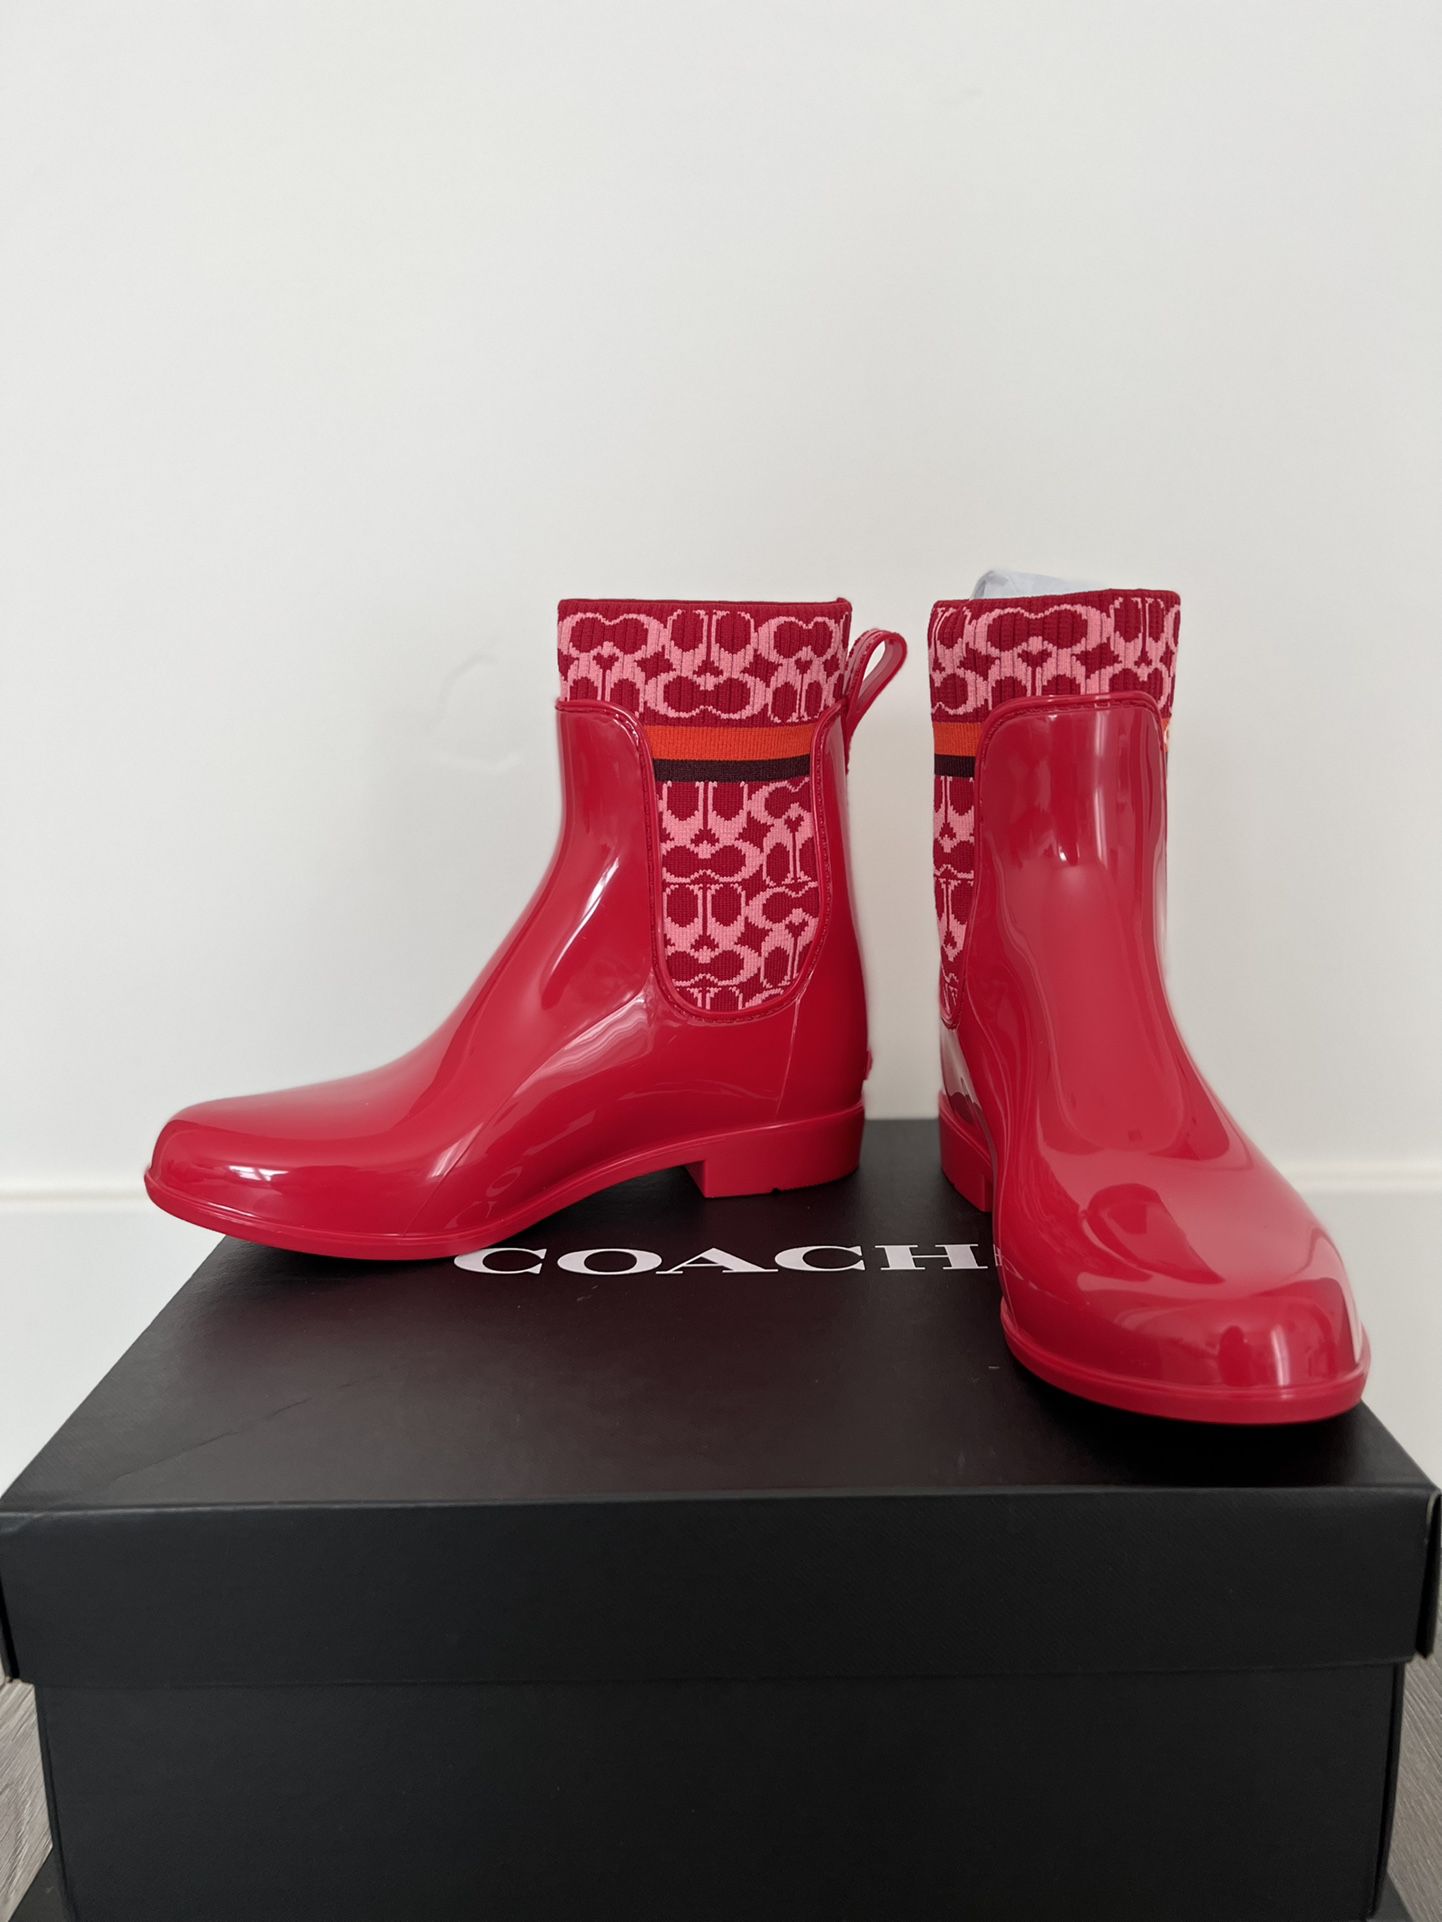 Authentic New! Receipt From Saks Fith Ave COACH Rivington Rain Boots 6 Candy Apple